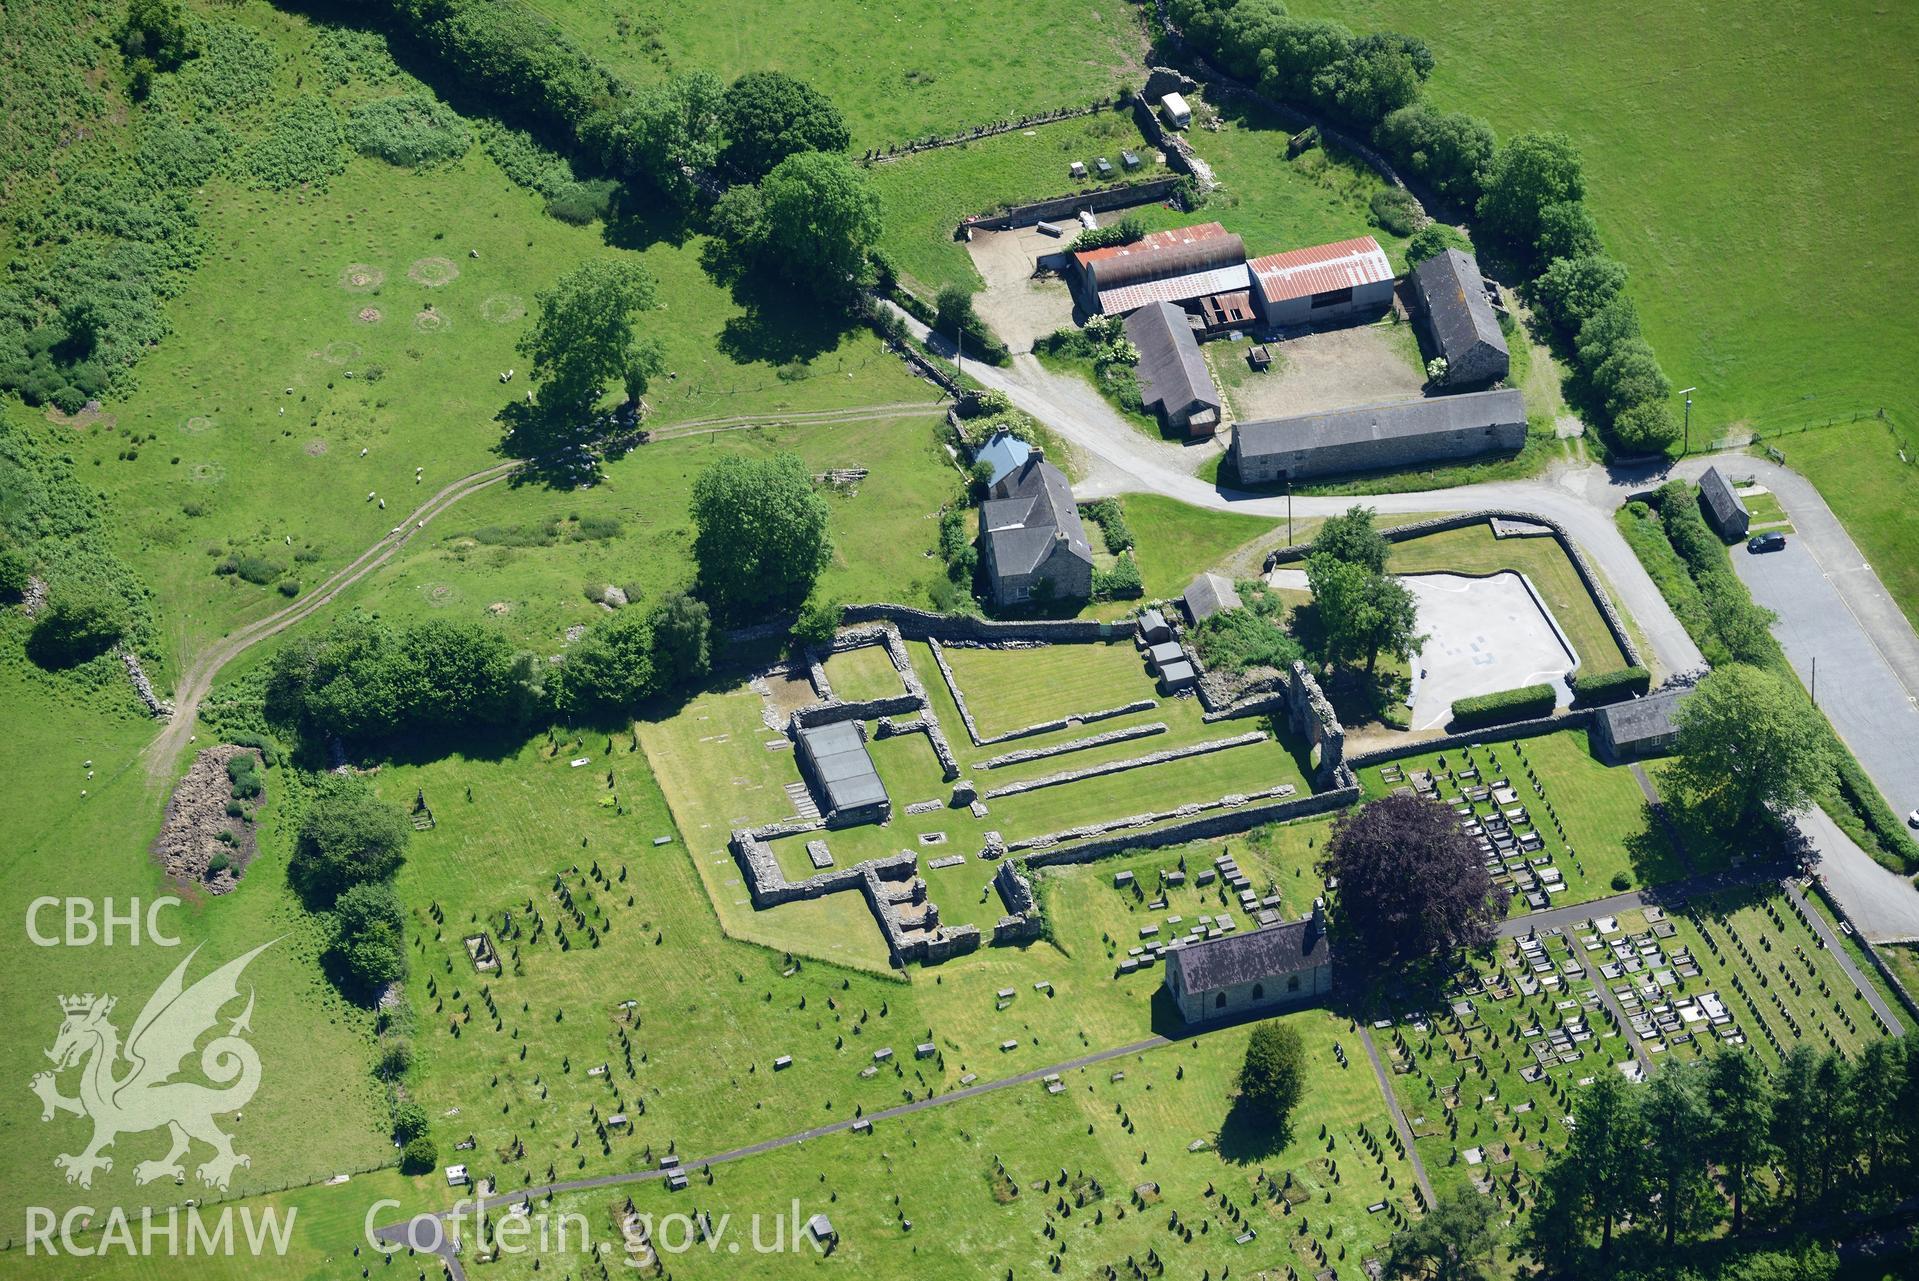 Abbey Farmhouse and St. Mary's church at Strata Florida abbey, Pontrhydfendigaid. Oblique aerial photograph taken during the Royal Commission's programme of archaeological aerial reconnaissance by Toby Driver on 30th June 2015.